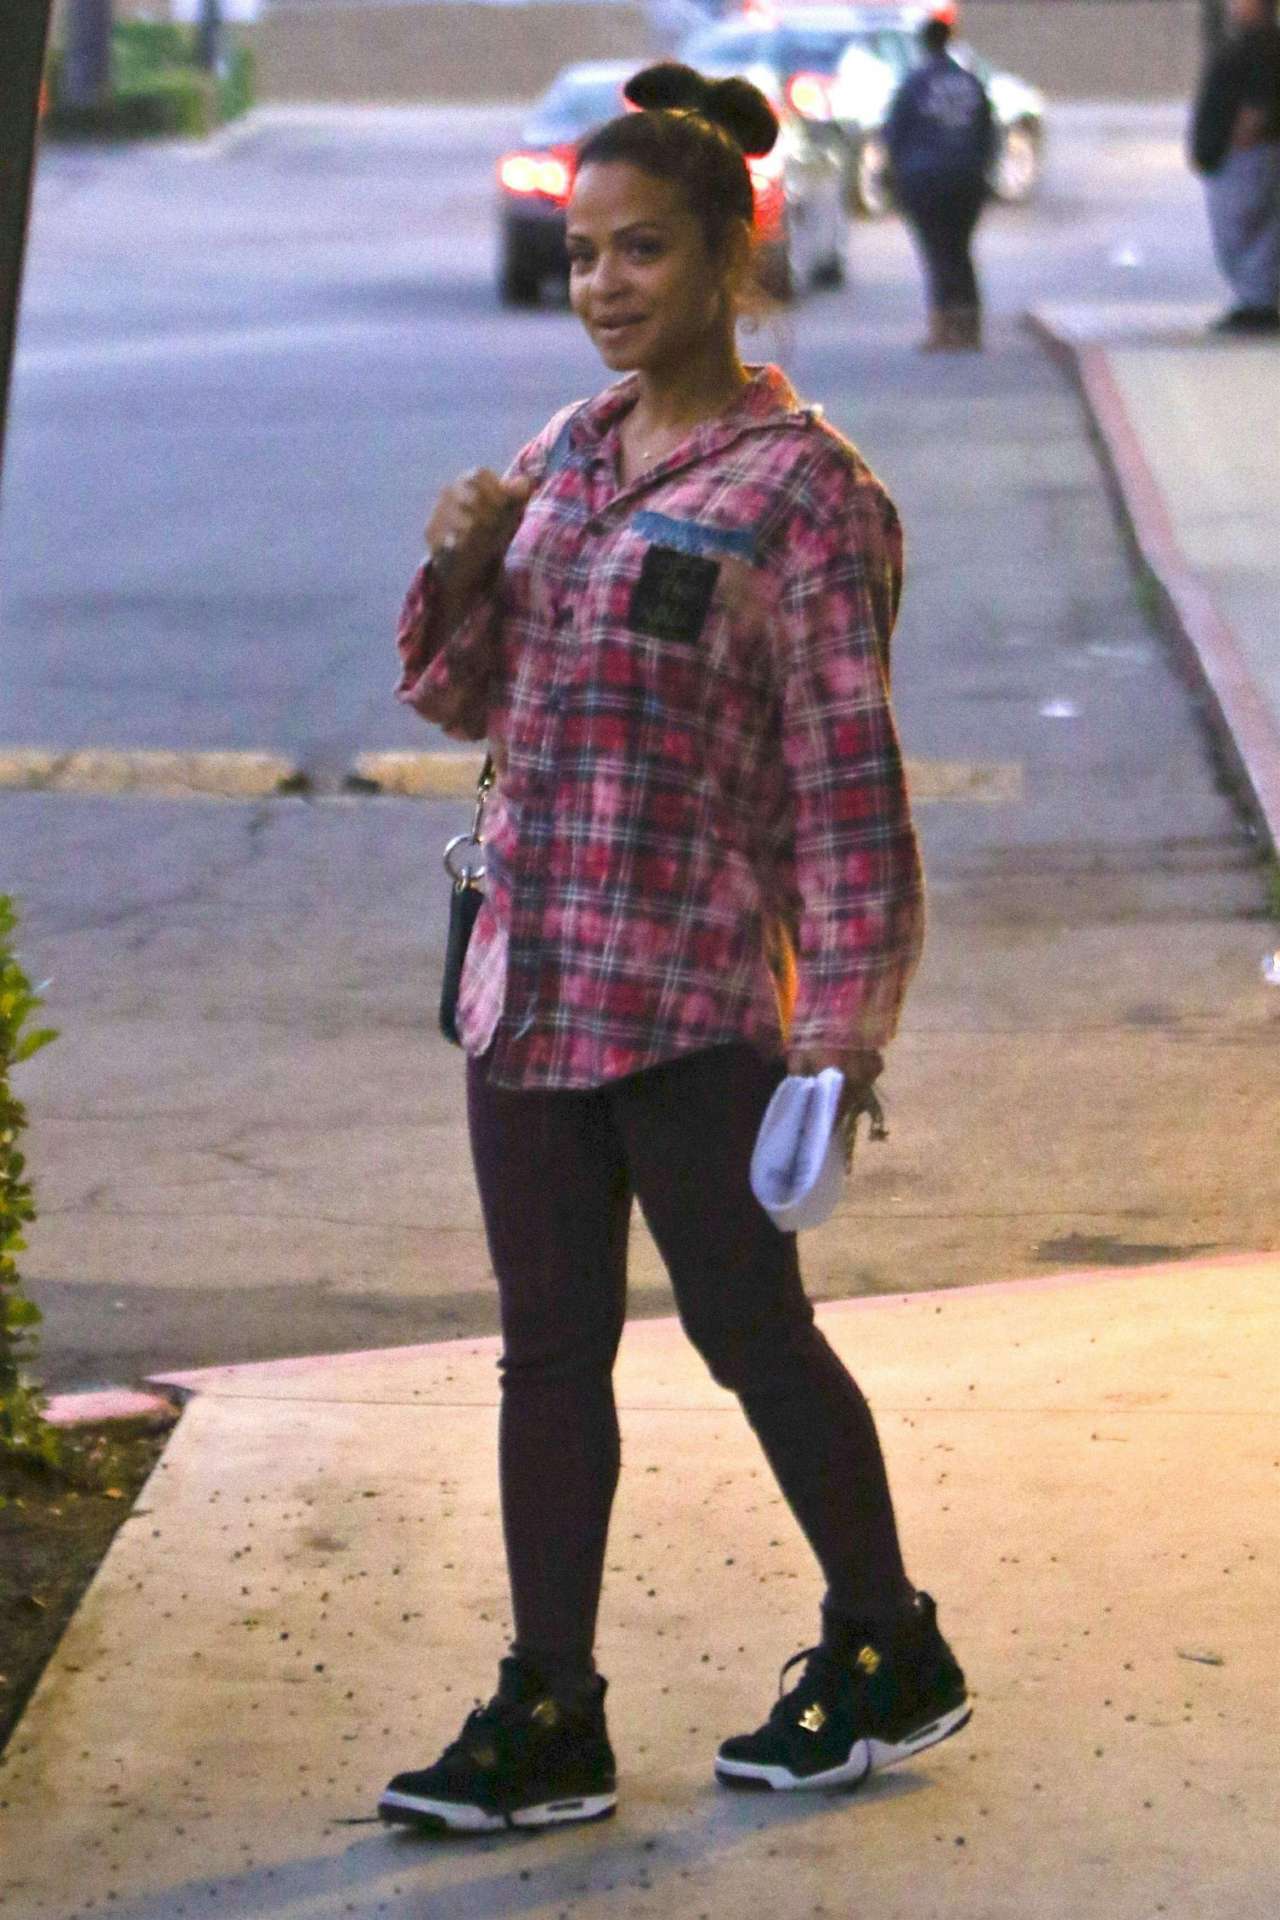 Christina Milian â€“ Spotted while out in Studio City